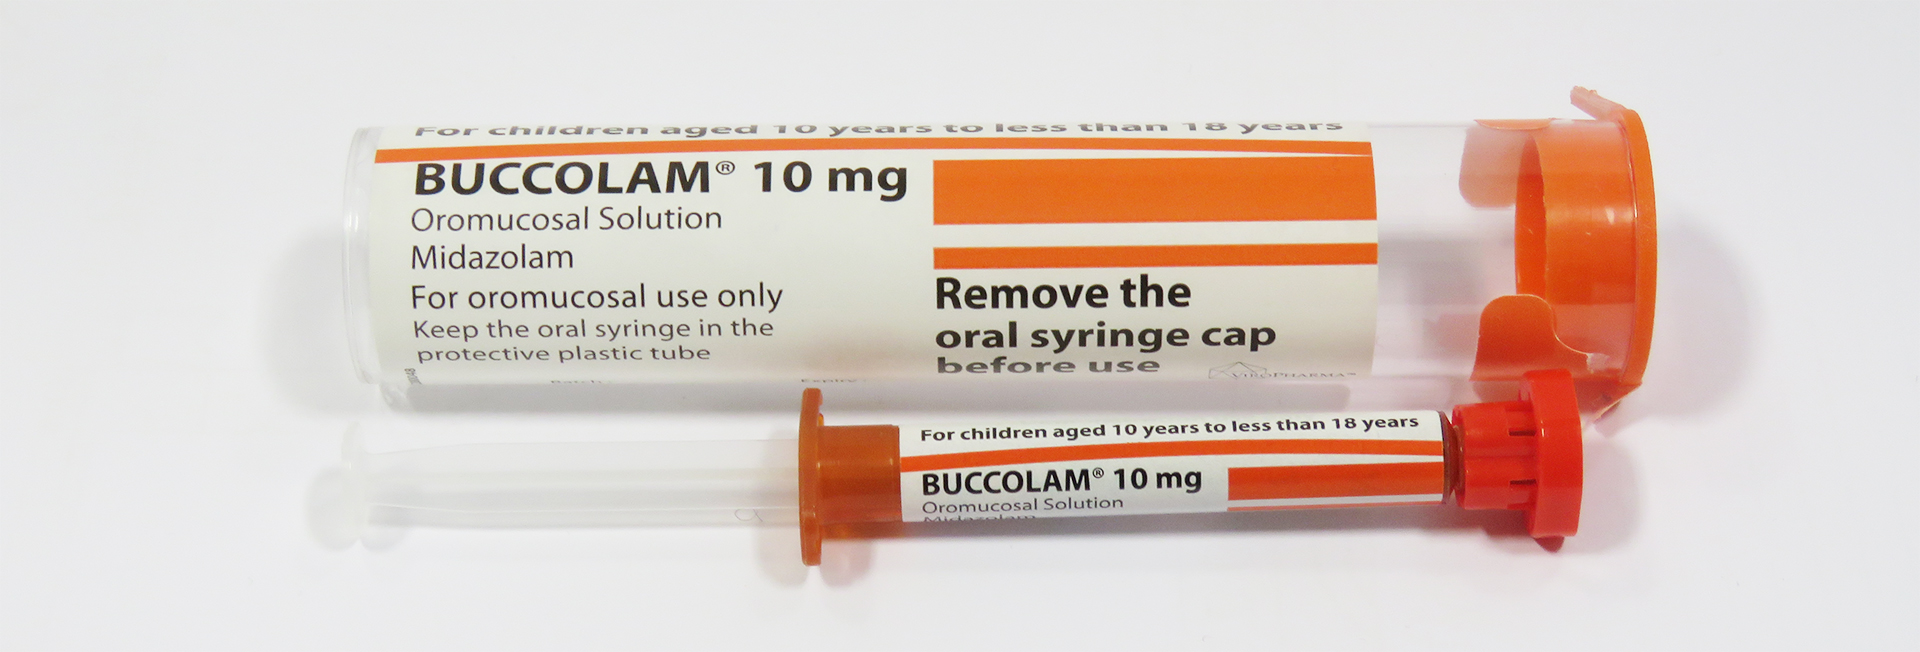 Learn how to properly administer Buccolam Midazolam with expert training from Epilepsy Awareness Ltd